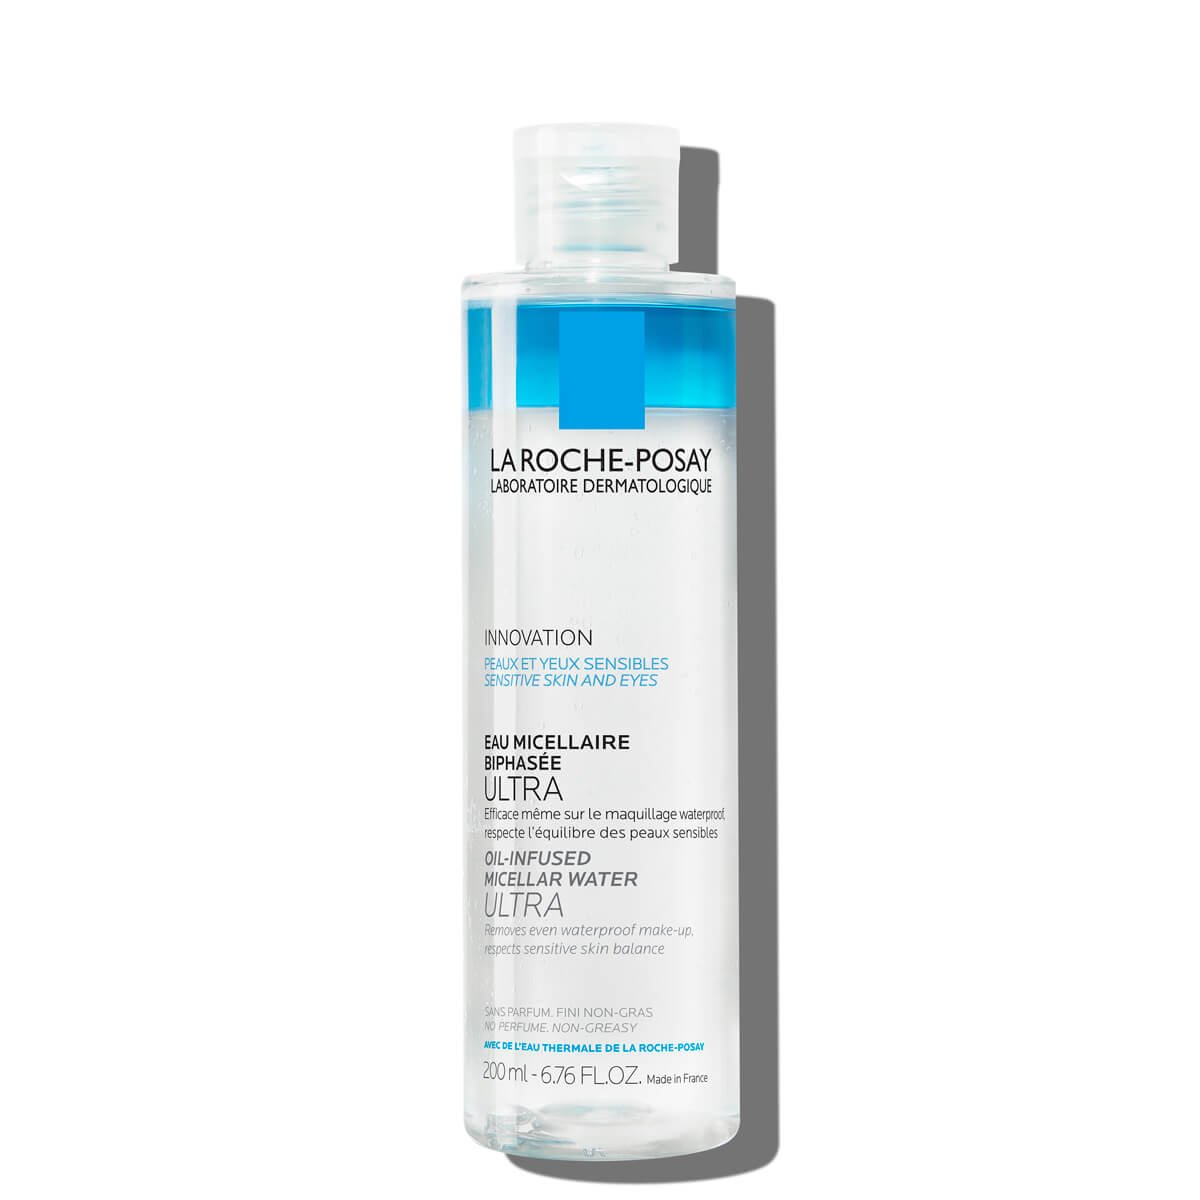 LaRochePosay-Product-Face-Physiological-Oil-Infused-Micellar-Water-Ultra-200ml-3337875725910-FSS